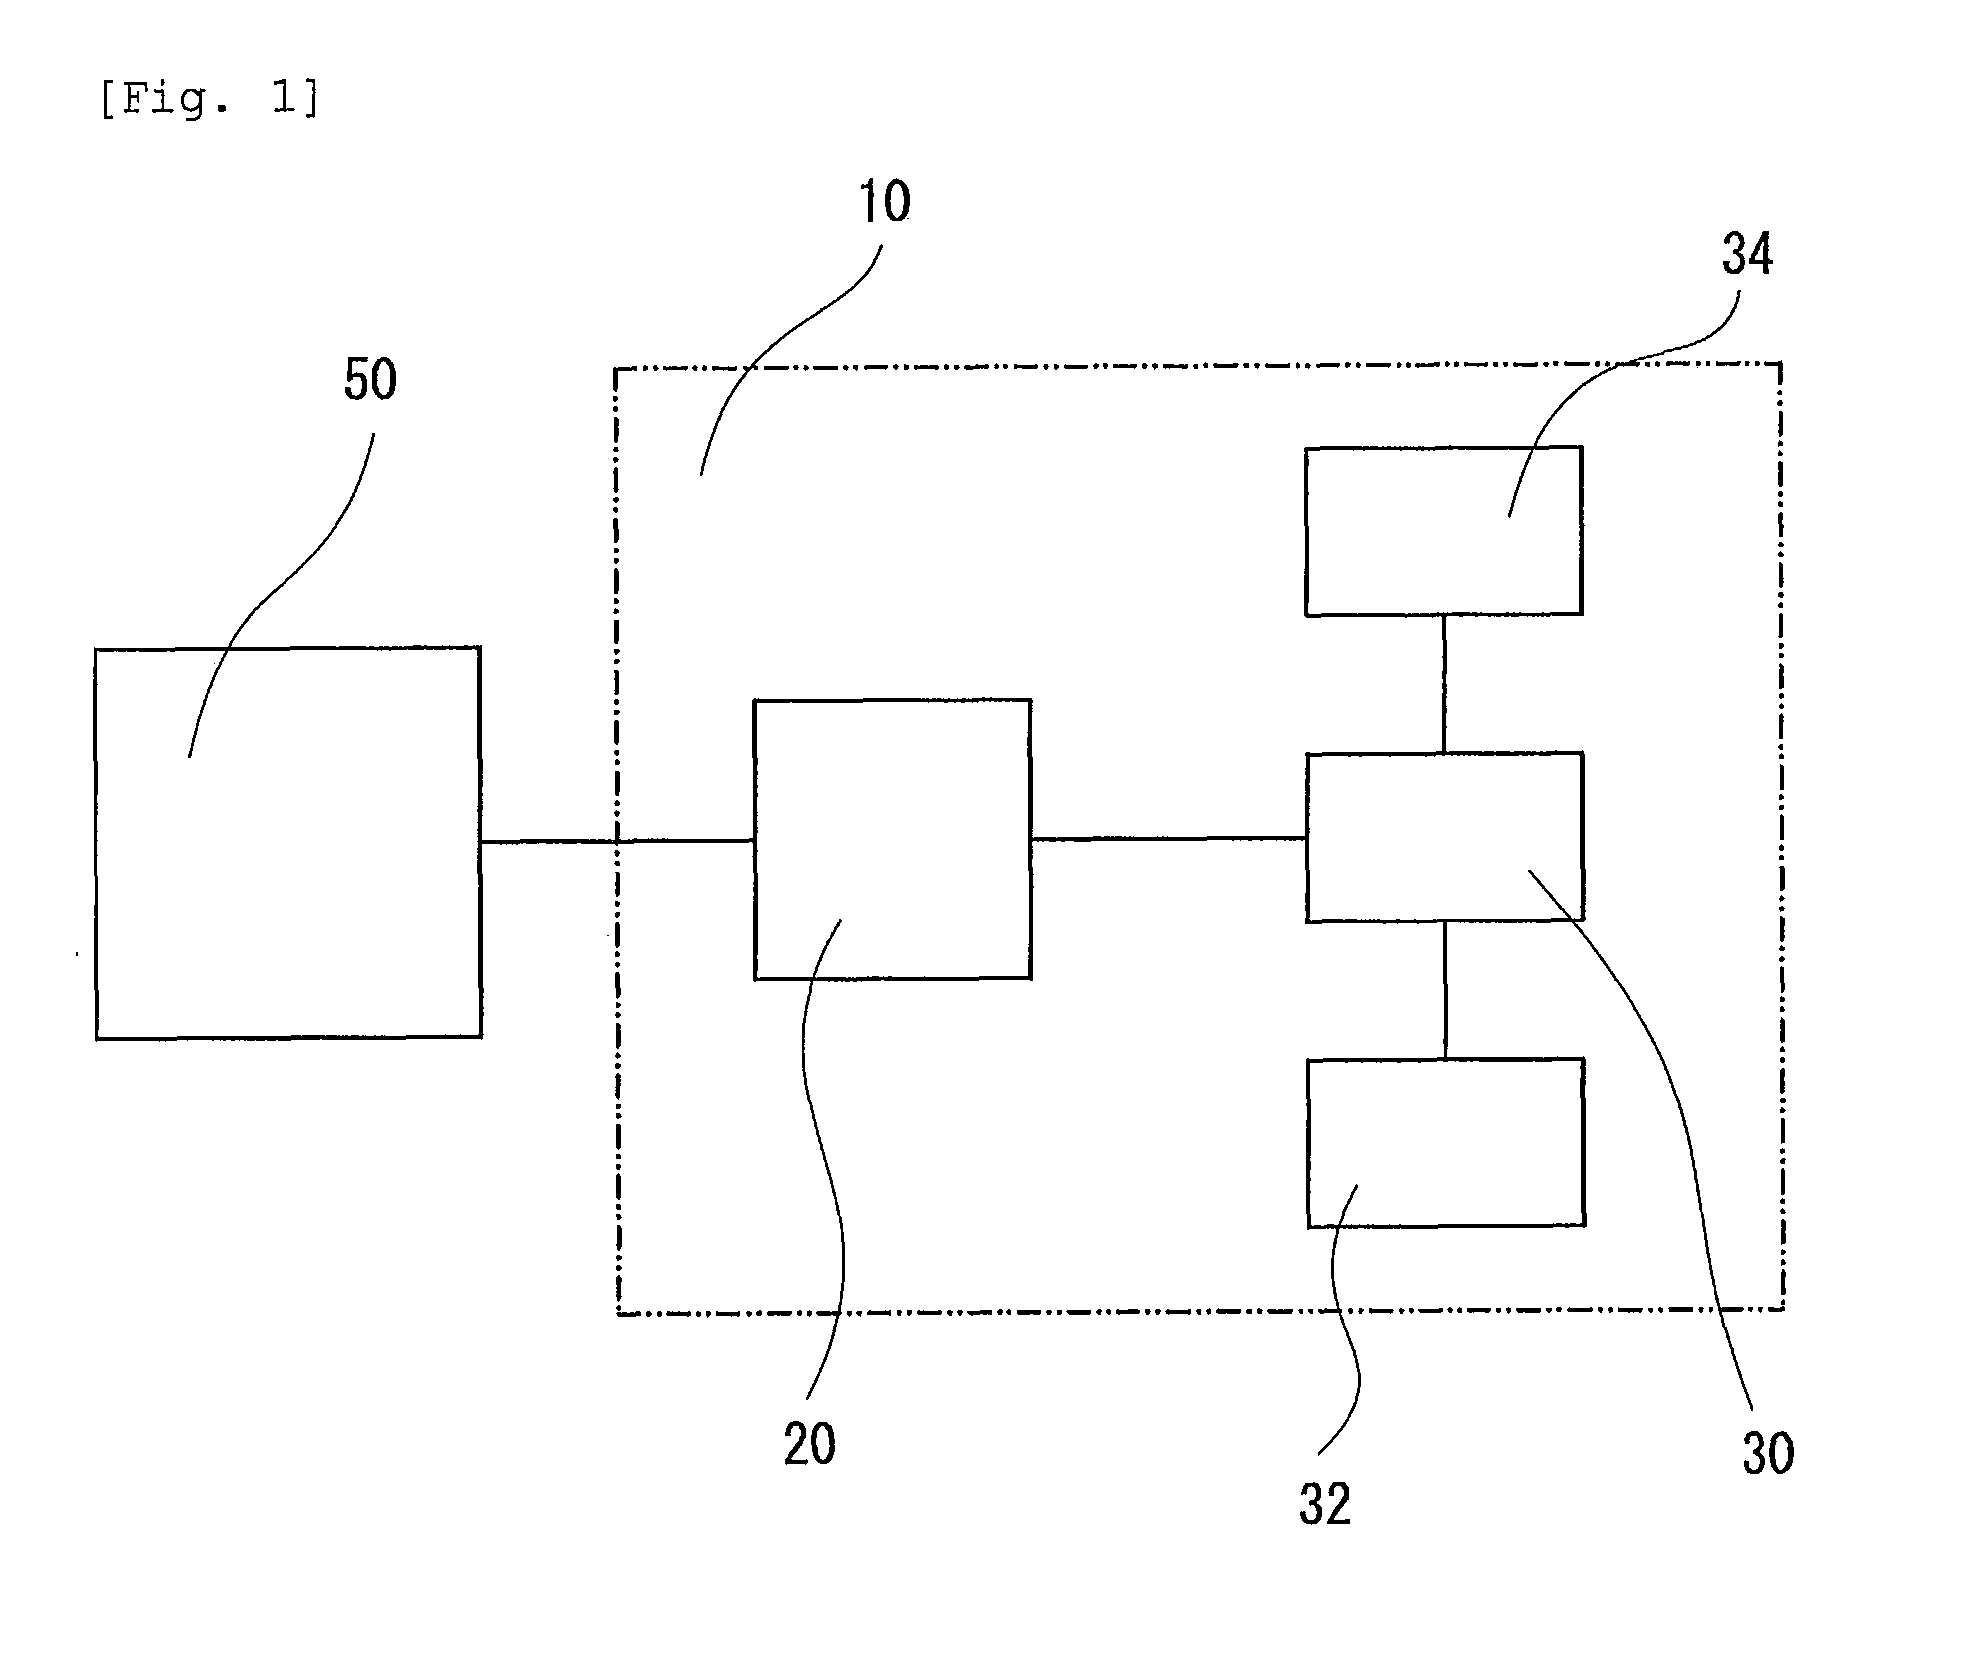 Battery Charger and Battery Charge Method